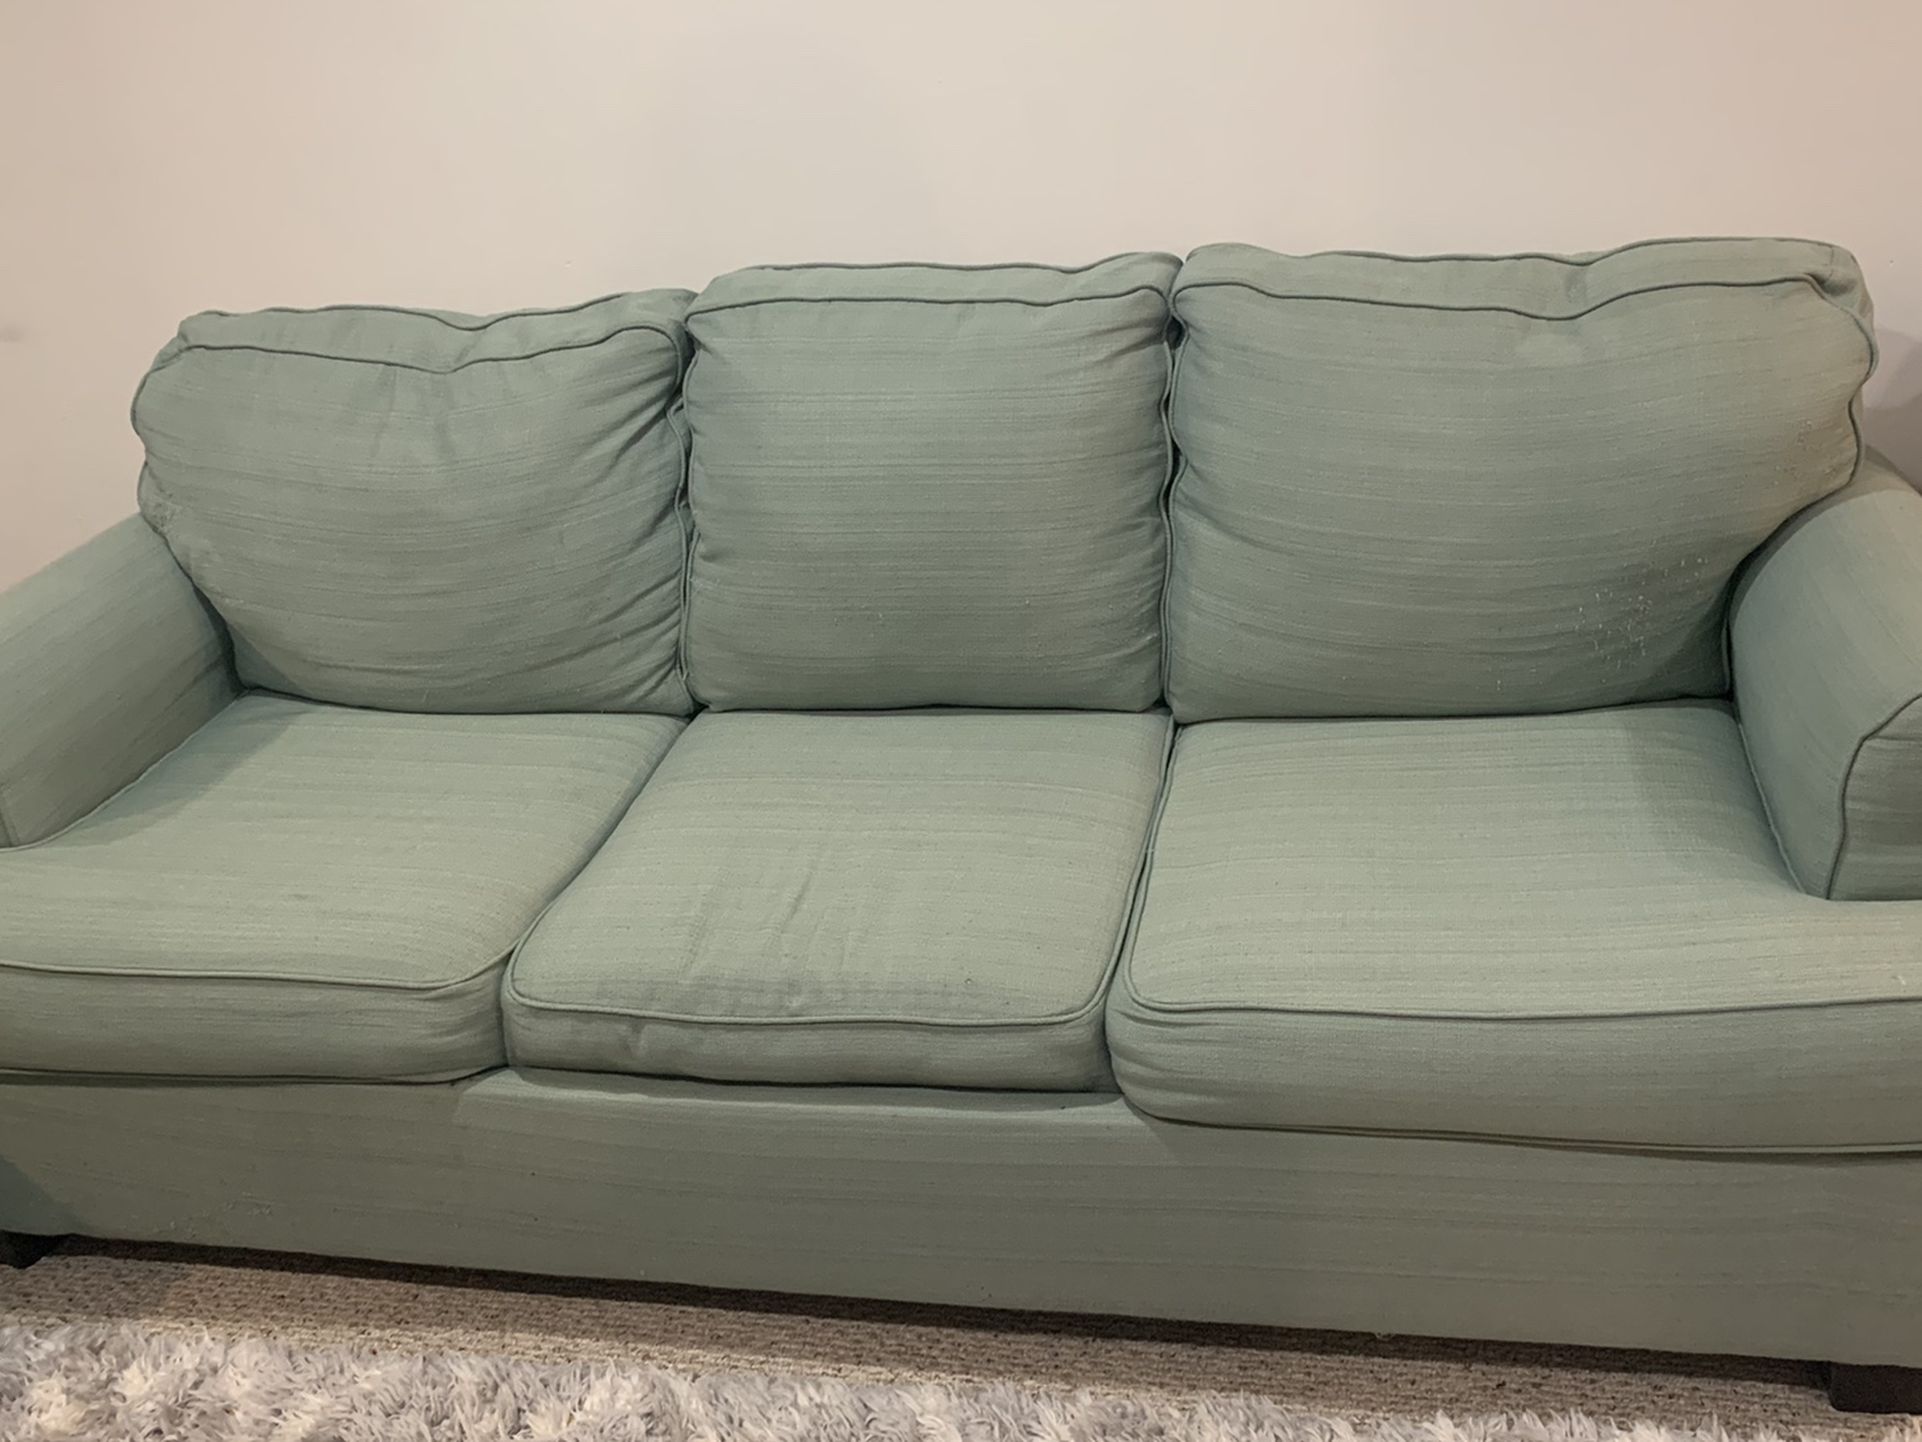 2 sofa 1 bed in good condition